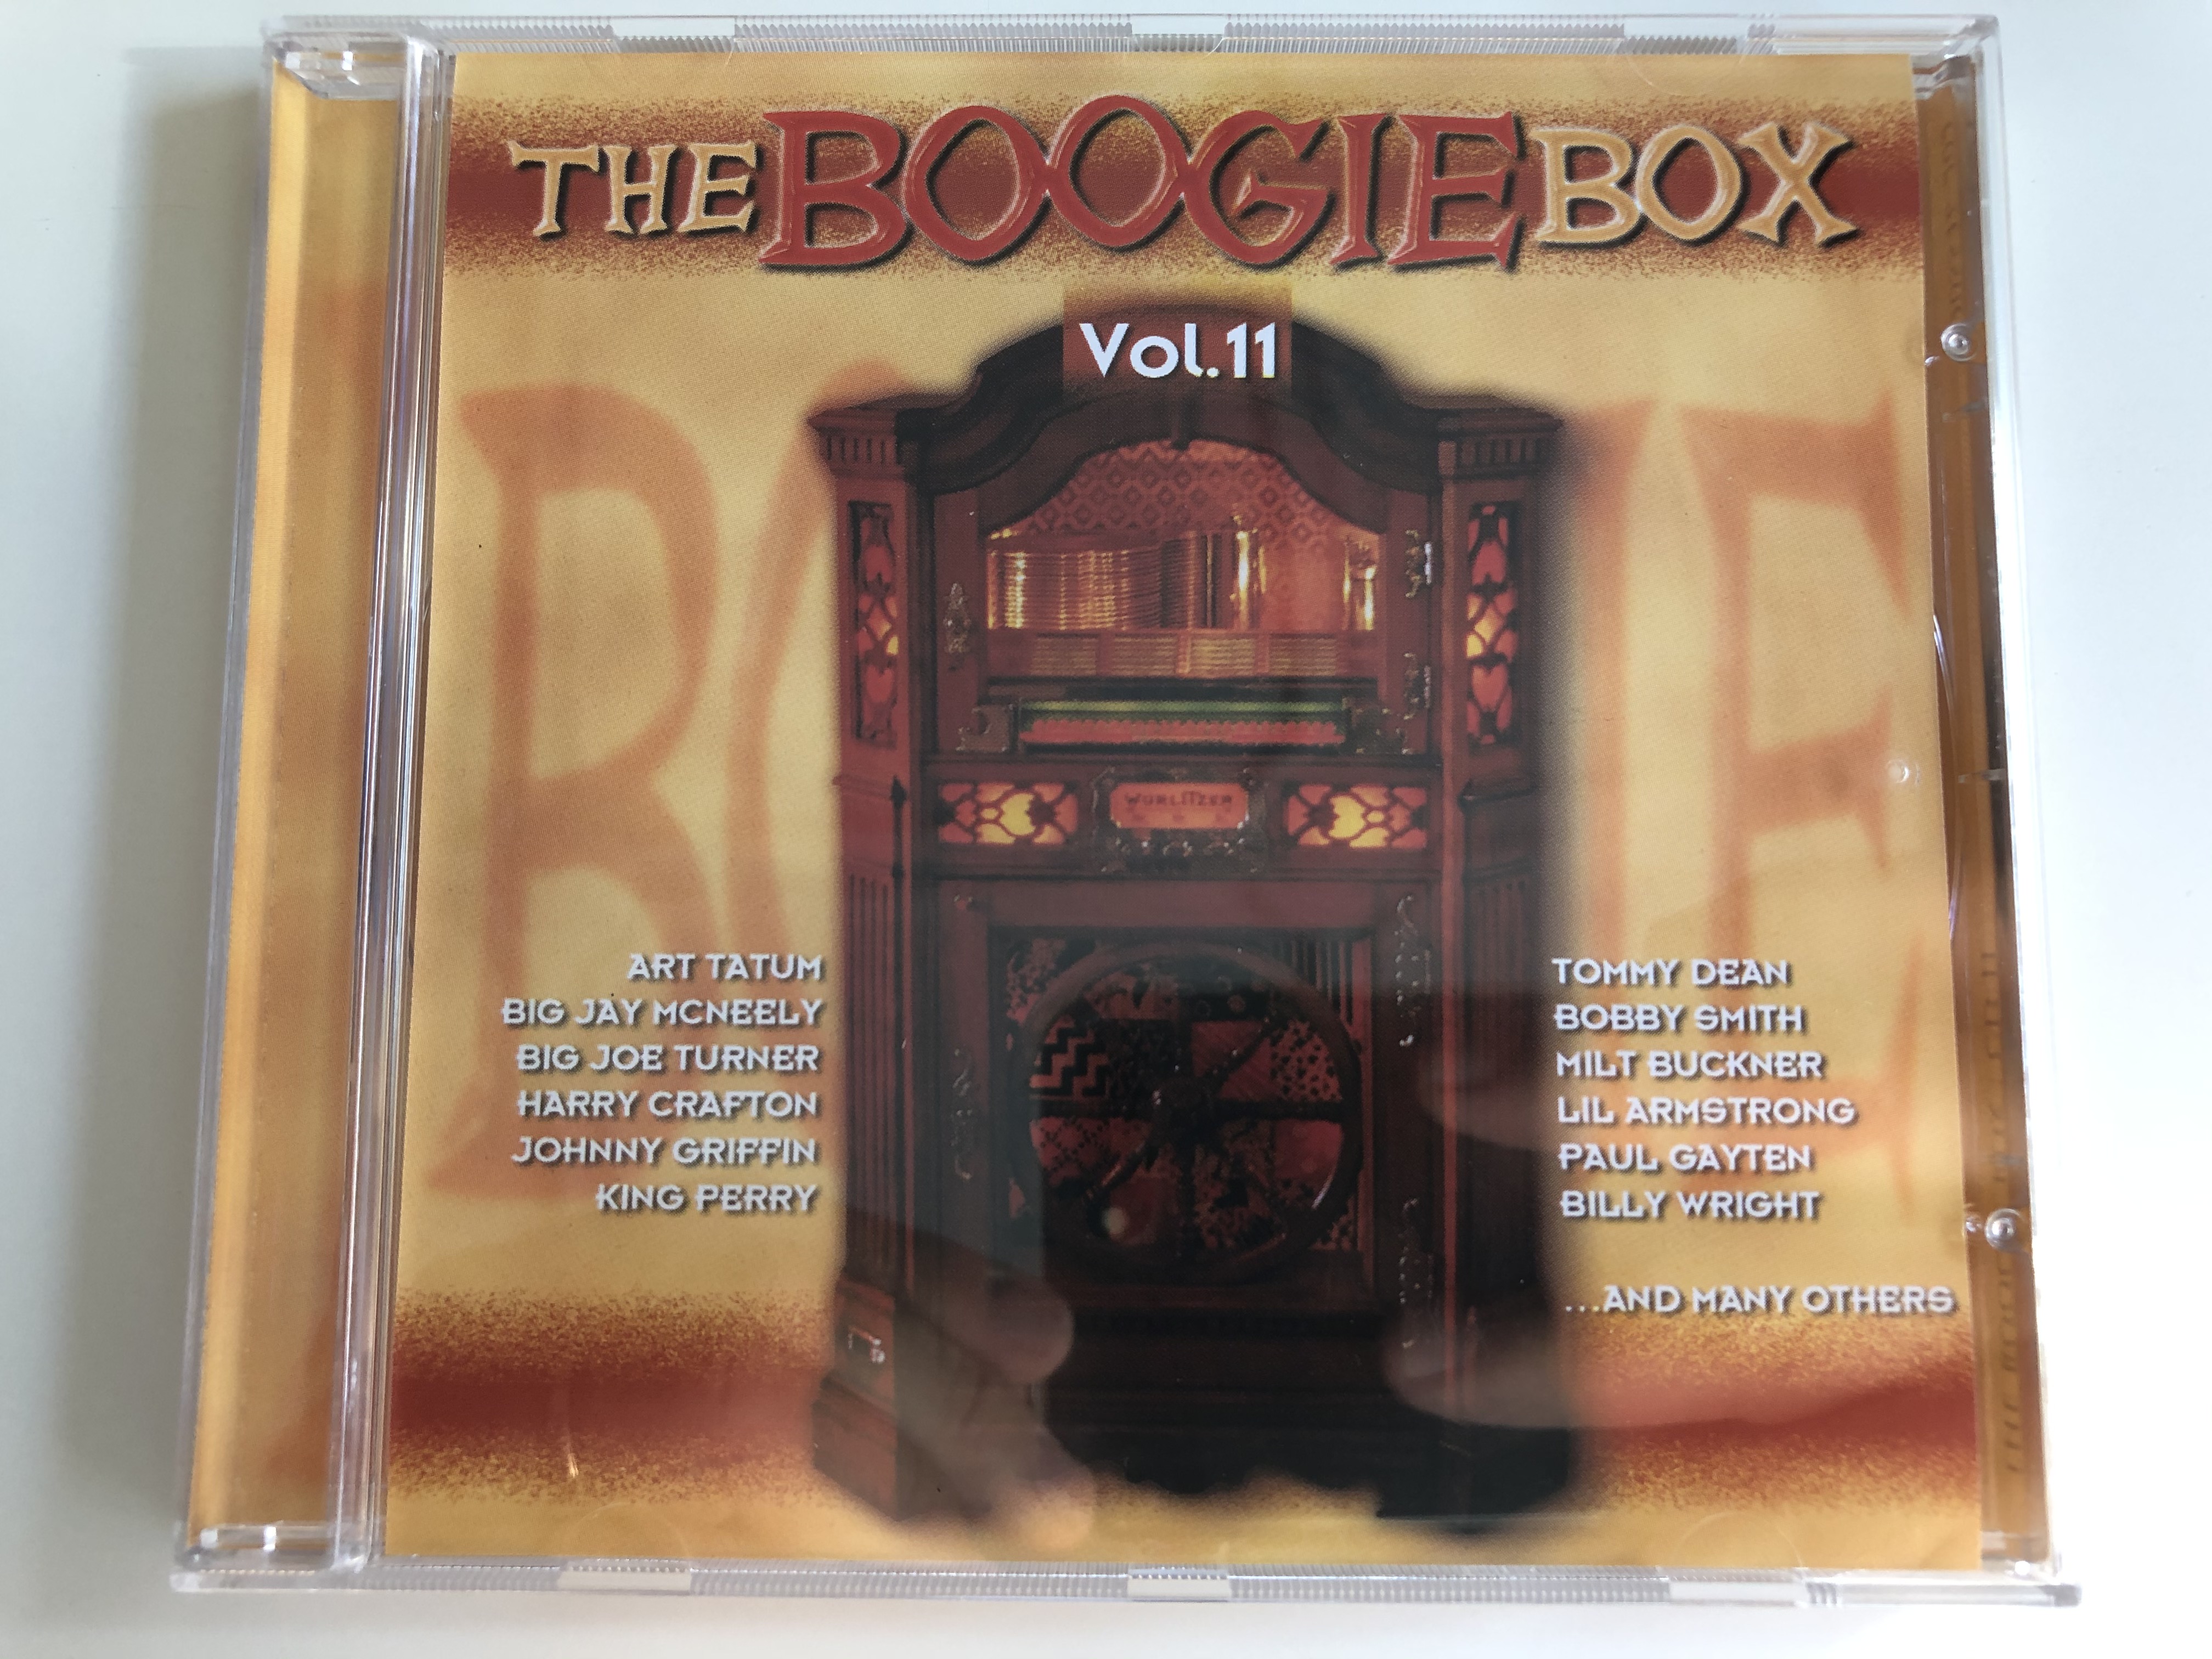 the-boogie-box-vol.-11-art-tatum-big-jay-mcneely-big-joe-turner-harry-crafton-johnny-griffin-king-perry-tommy-dean-bobby-smith-milt-buckner-lil-armstrong-paul-gayten-billy-wright-and-many-others-ti-1-.jpg